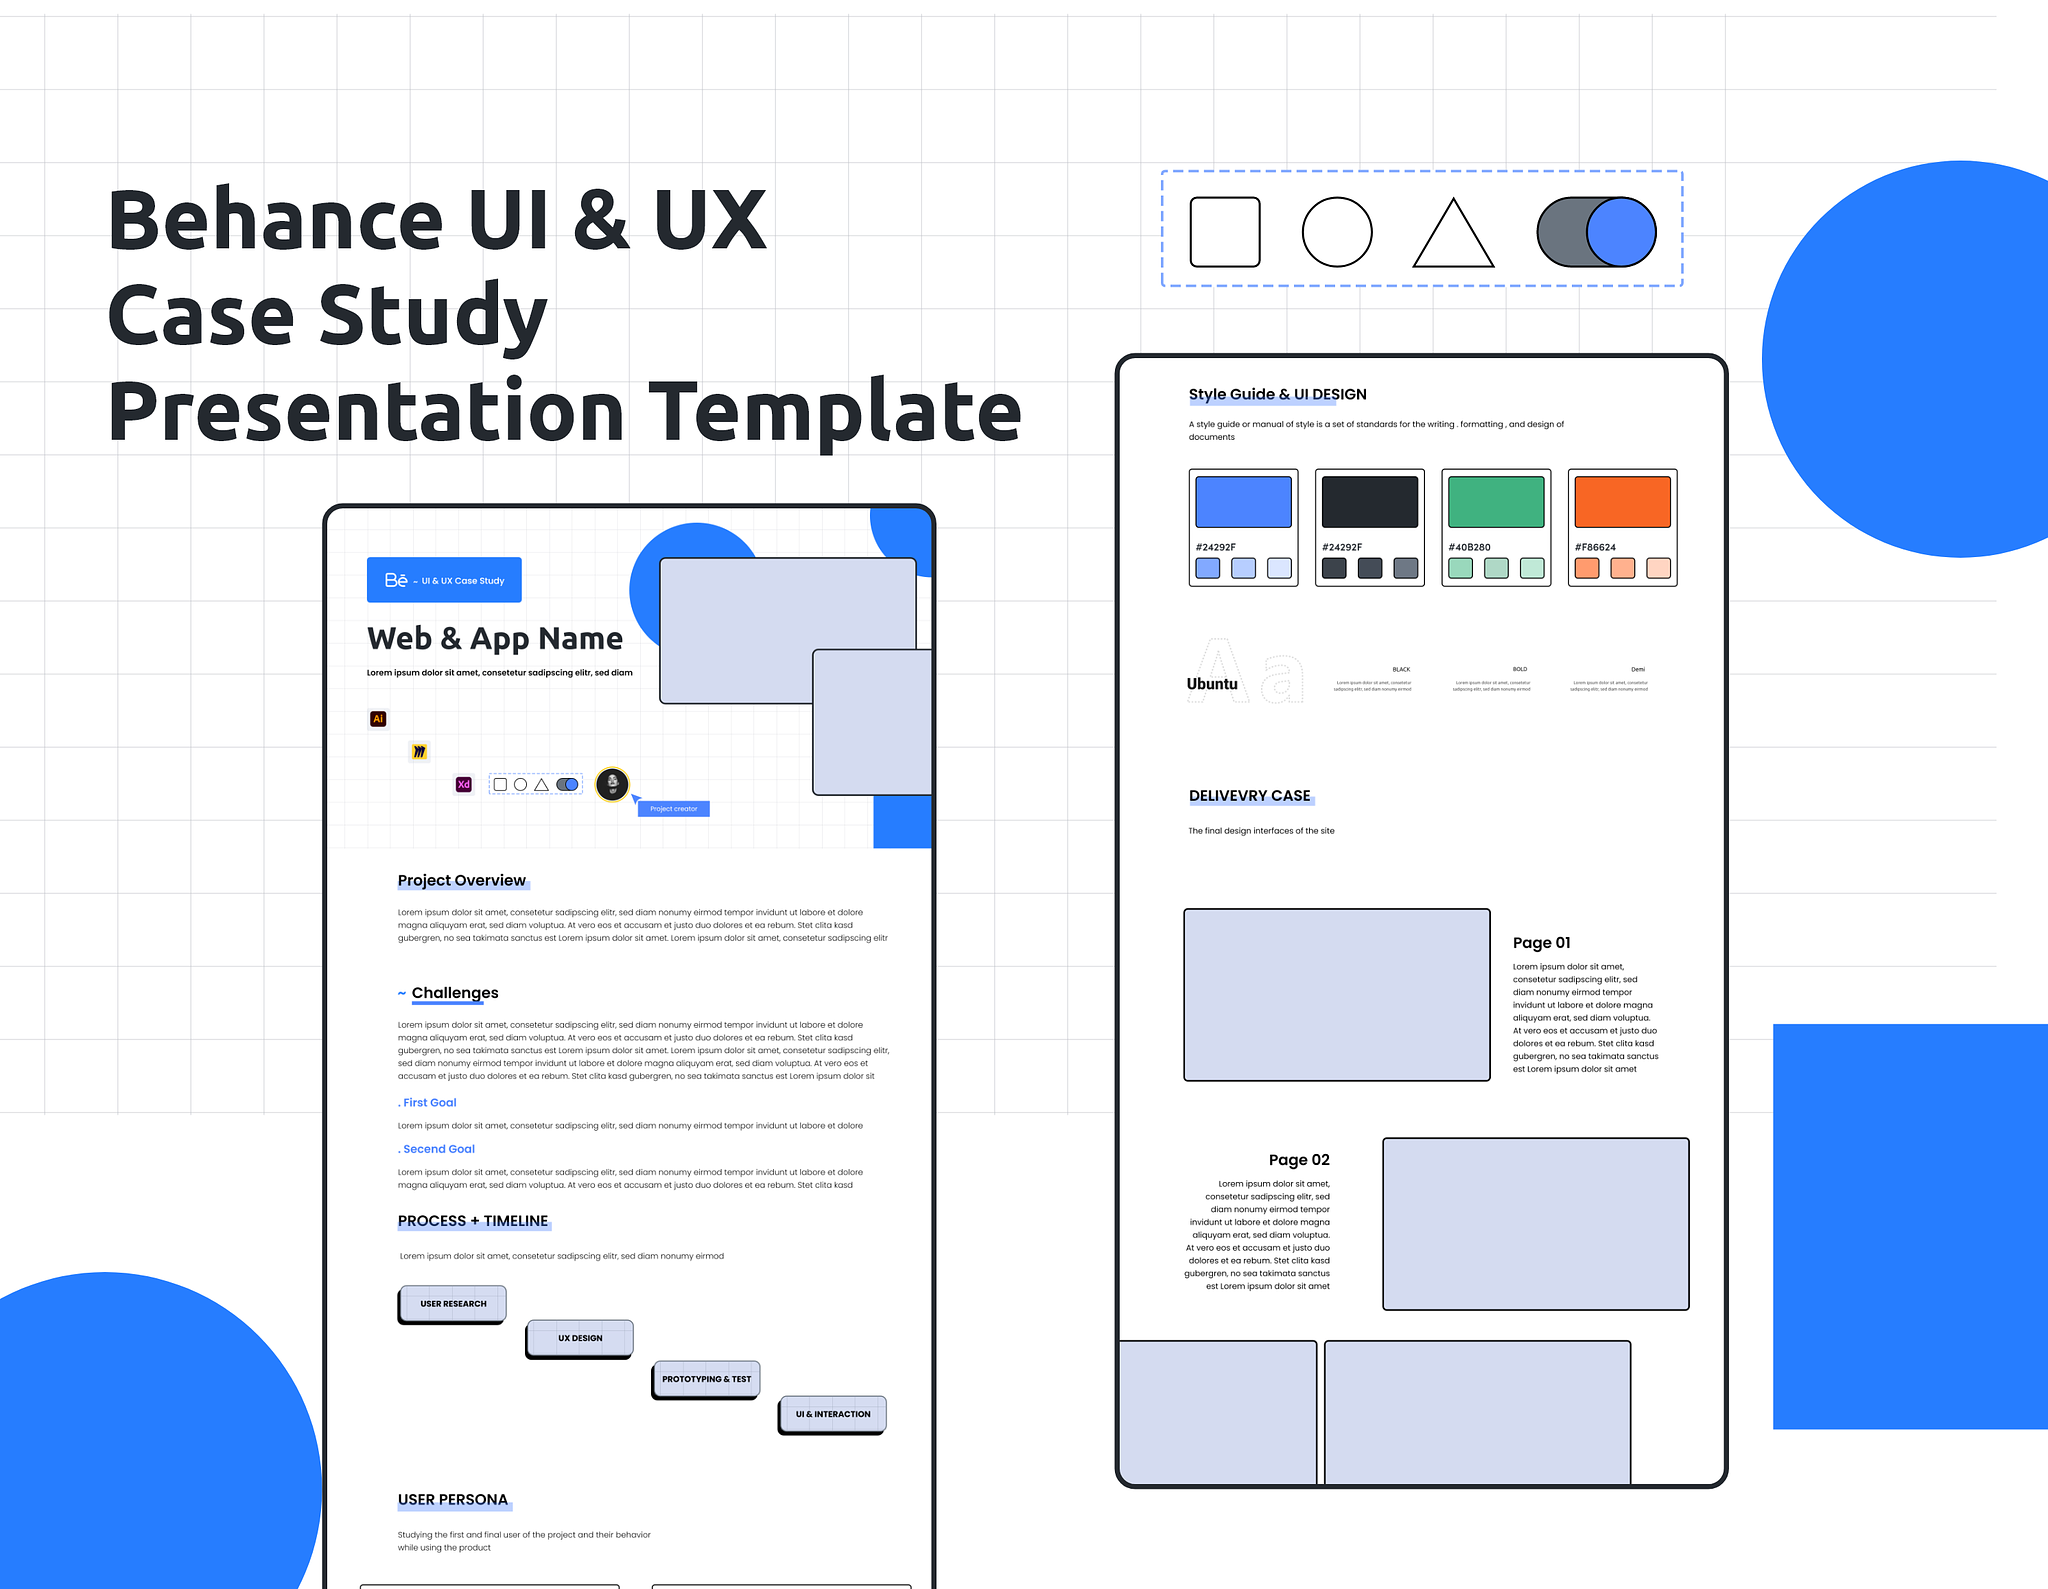 Behance UI & UX Case Study Template by Yahia Anas on Dribbble